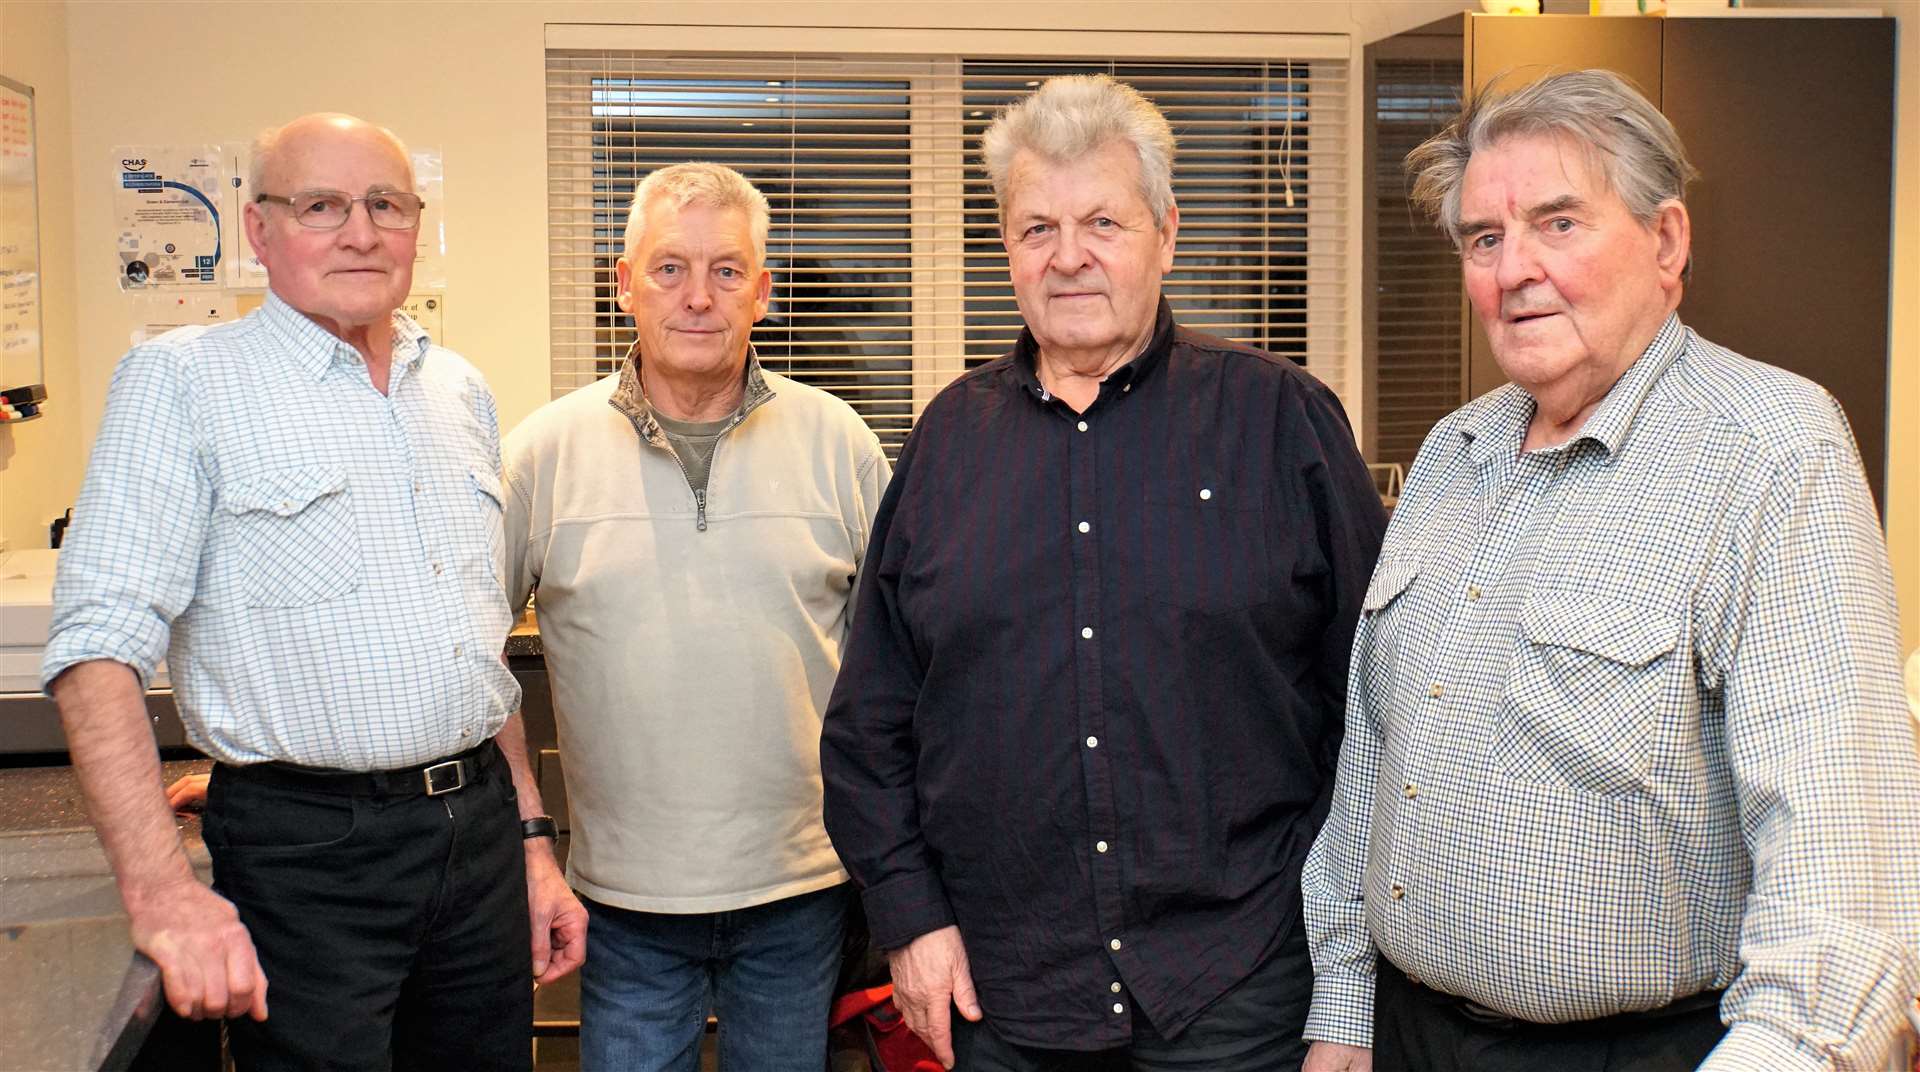 The outgoing vintage car club committee consists of Bert Cooper (safety officer and committee member), Les Bremner (committee member), David Green (treasurer) and Bert Macleod (chairman). Picture: DGS